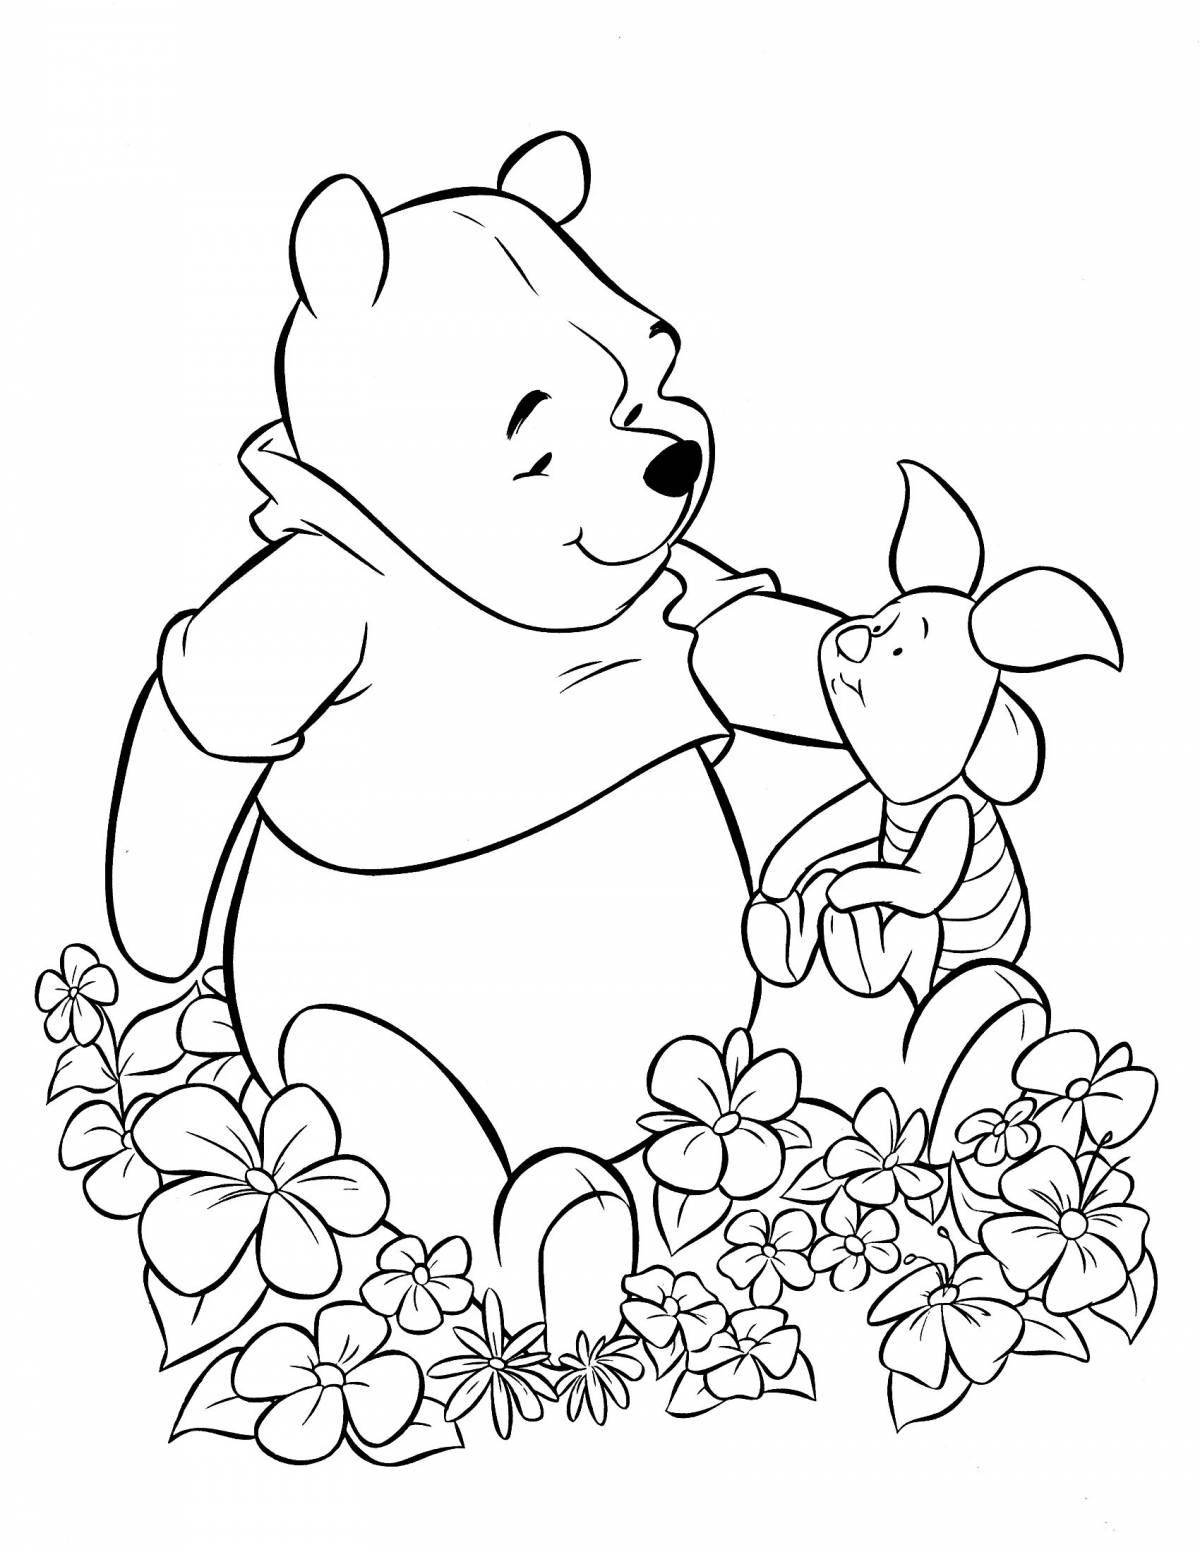 Coloring page adorable winnie the pooh and his friends